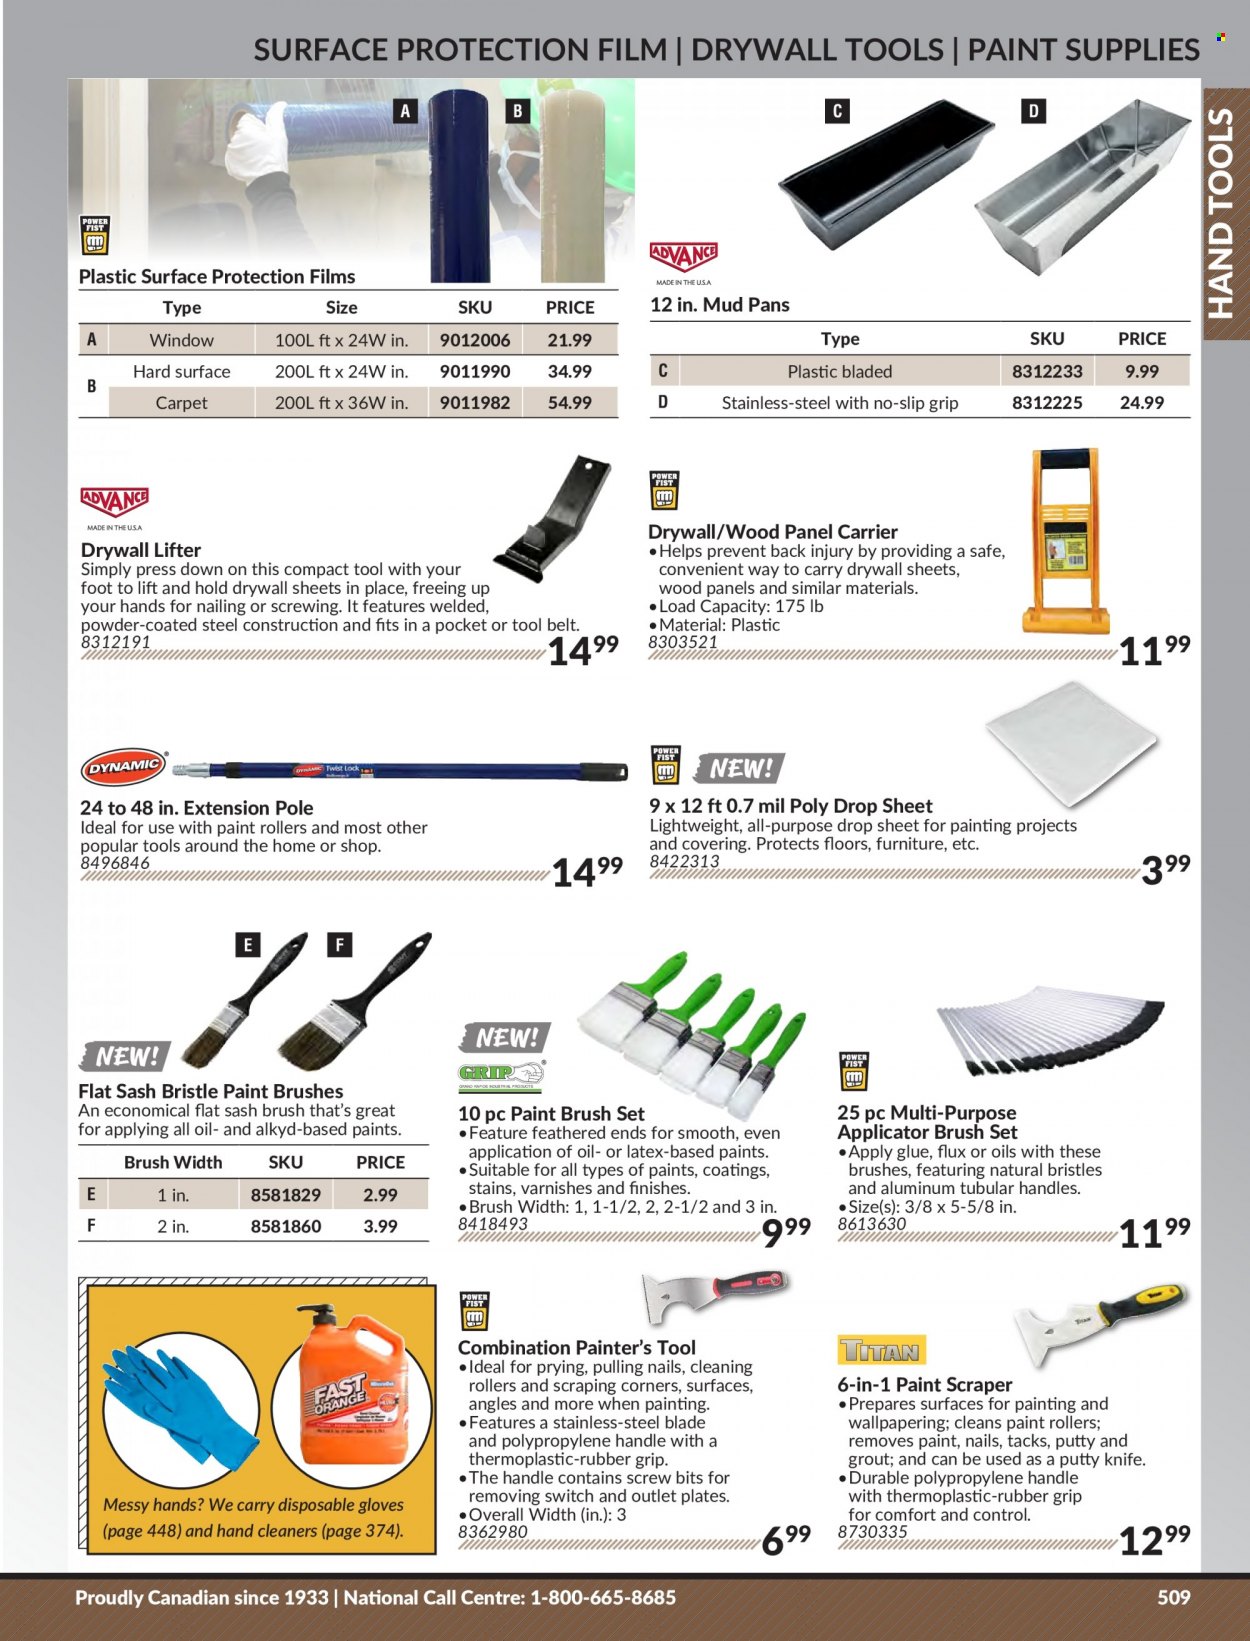 thumbnail - Princess Auto Flyer - Sales products - glue, paint brush, brush set, plastic drop sheet, hand tools, knife, gloves, tool belt. Page 519.